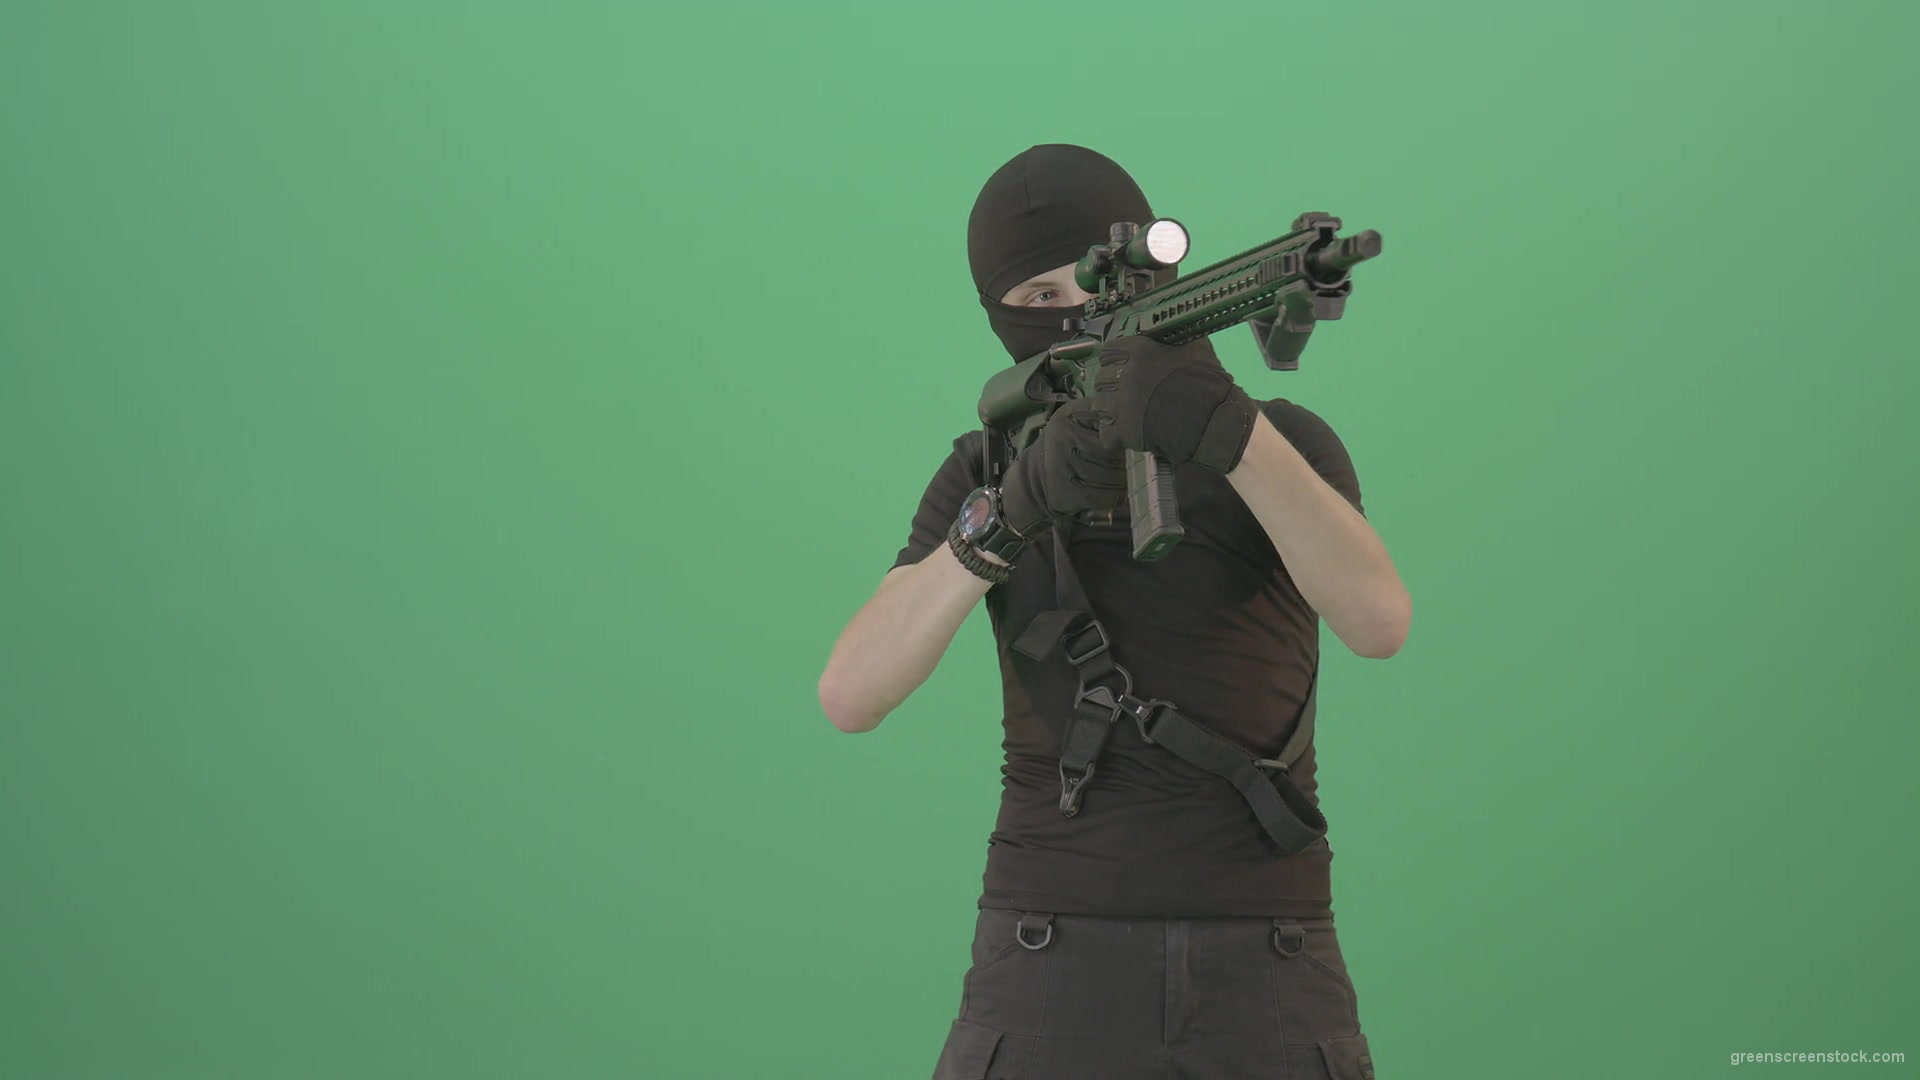 Soldier-in-black-mask-shooting-enemies-with-military-gun-on-green-screen-4K-Video-Footage-1920_006 Green Screen Stock